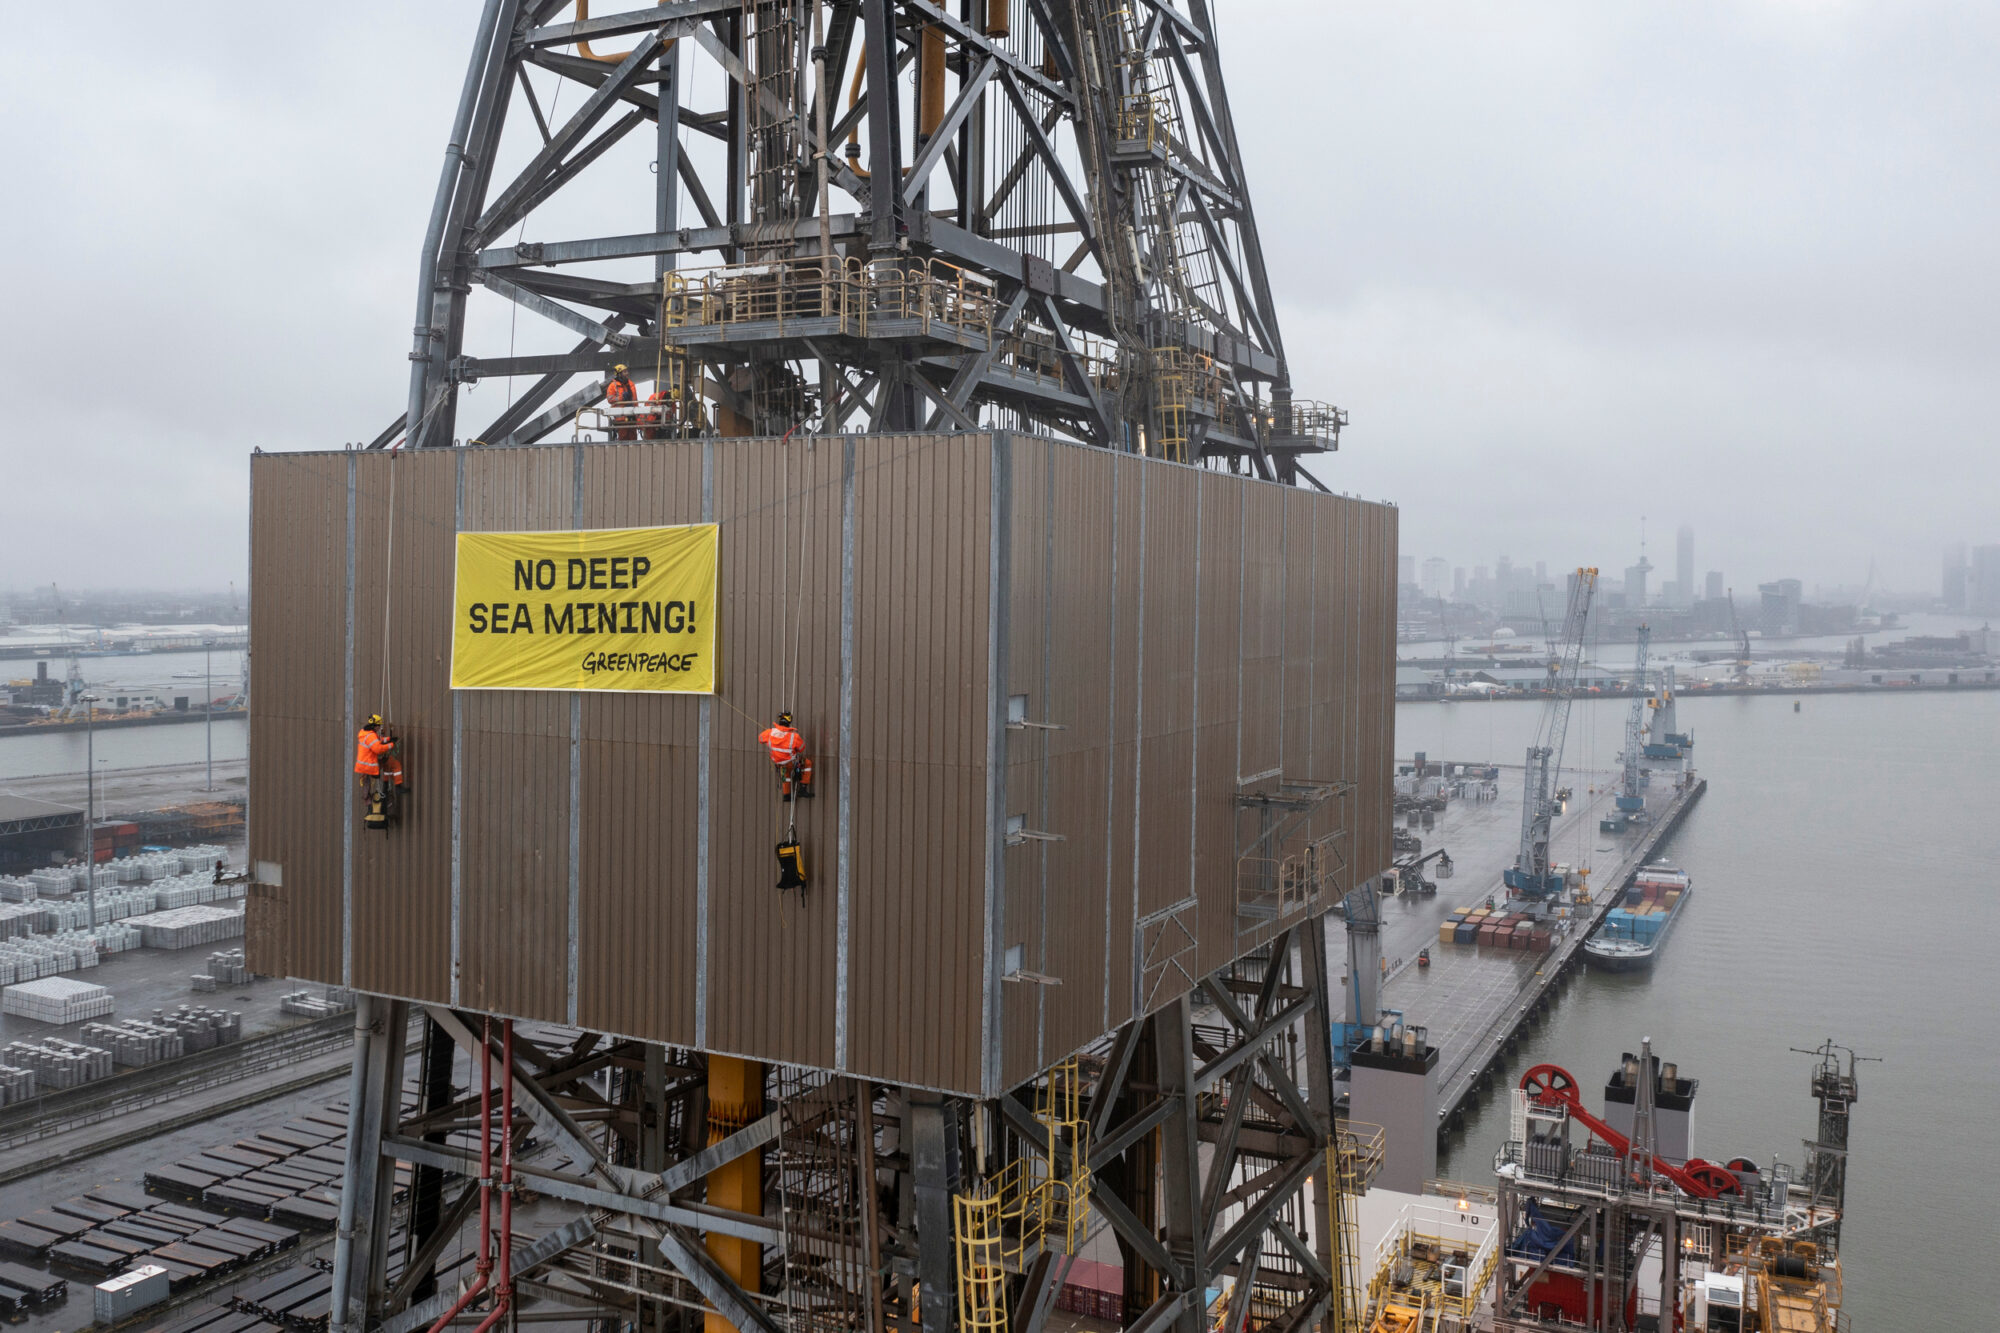 Two climbers hang on the side of a tall tower made of steel beams. Between the climbers is a yellow banner reading "No Deep Sea Mining!". Port infrastructure and open water can be seen in the background.